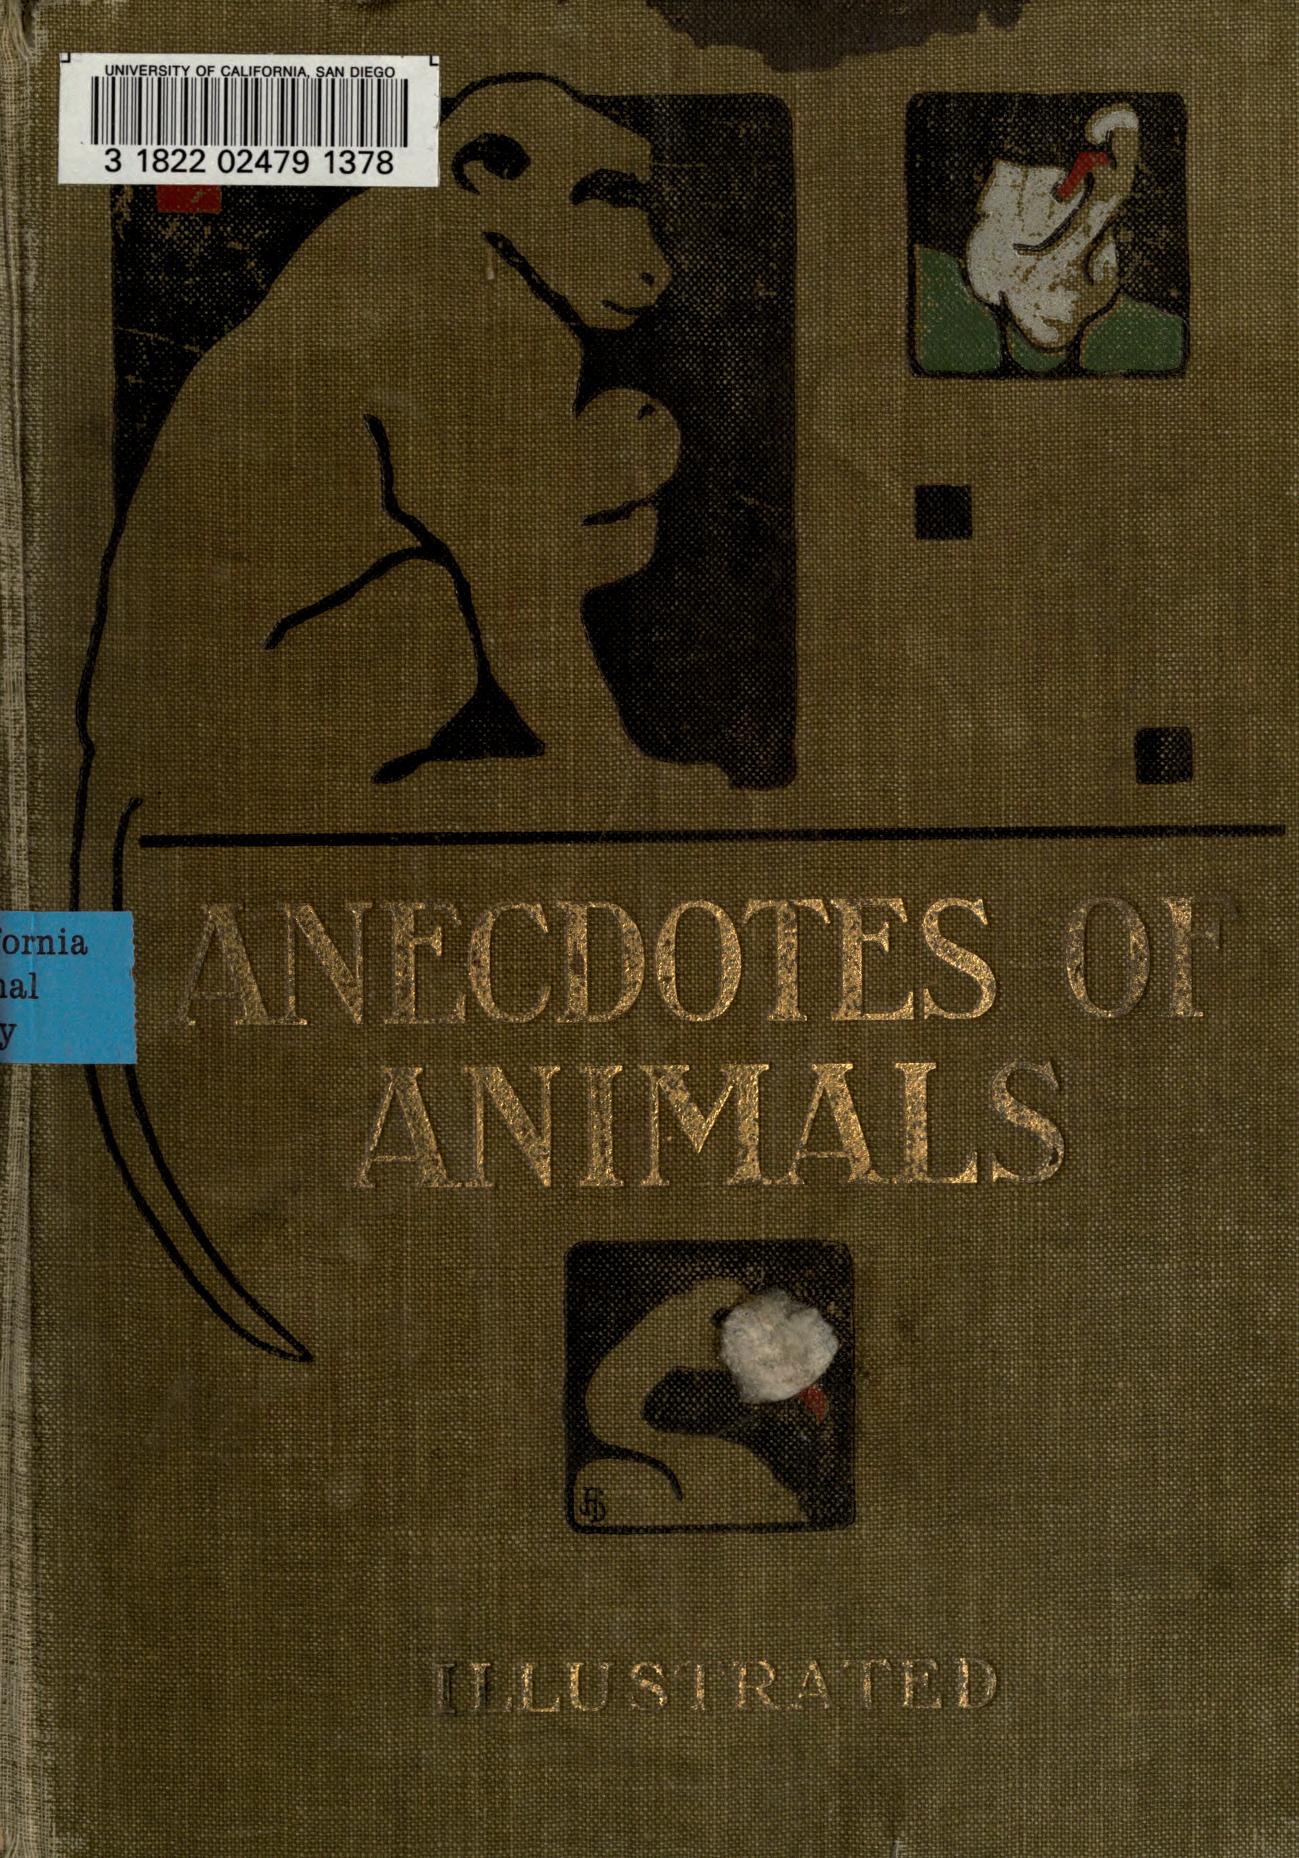 Anecdotes of Animals (1905) – The Public Domain Review